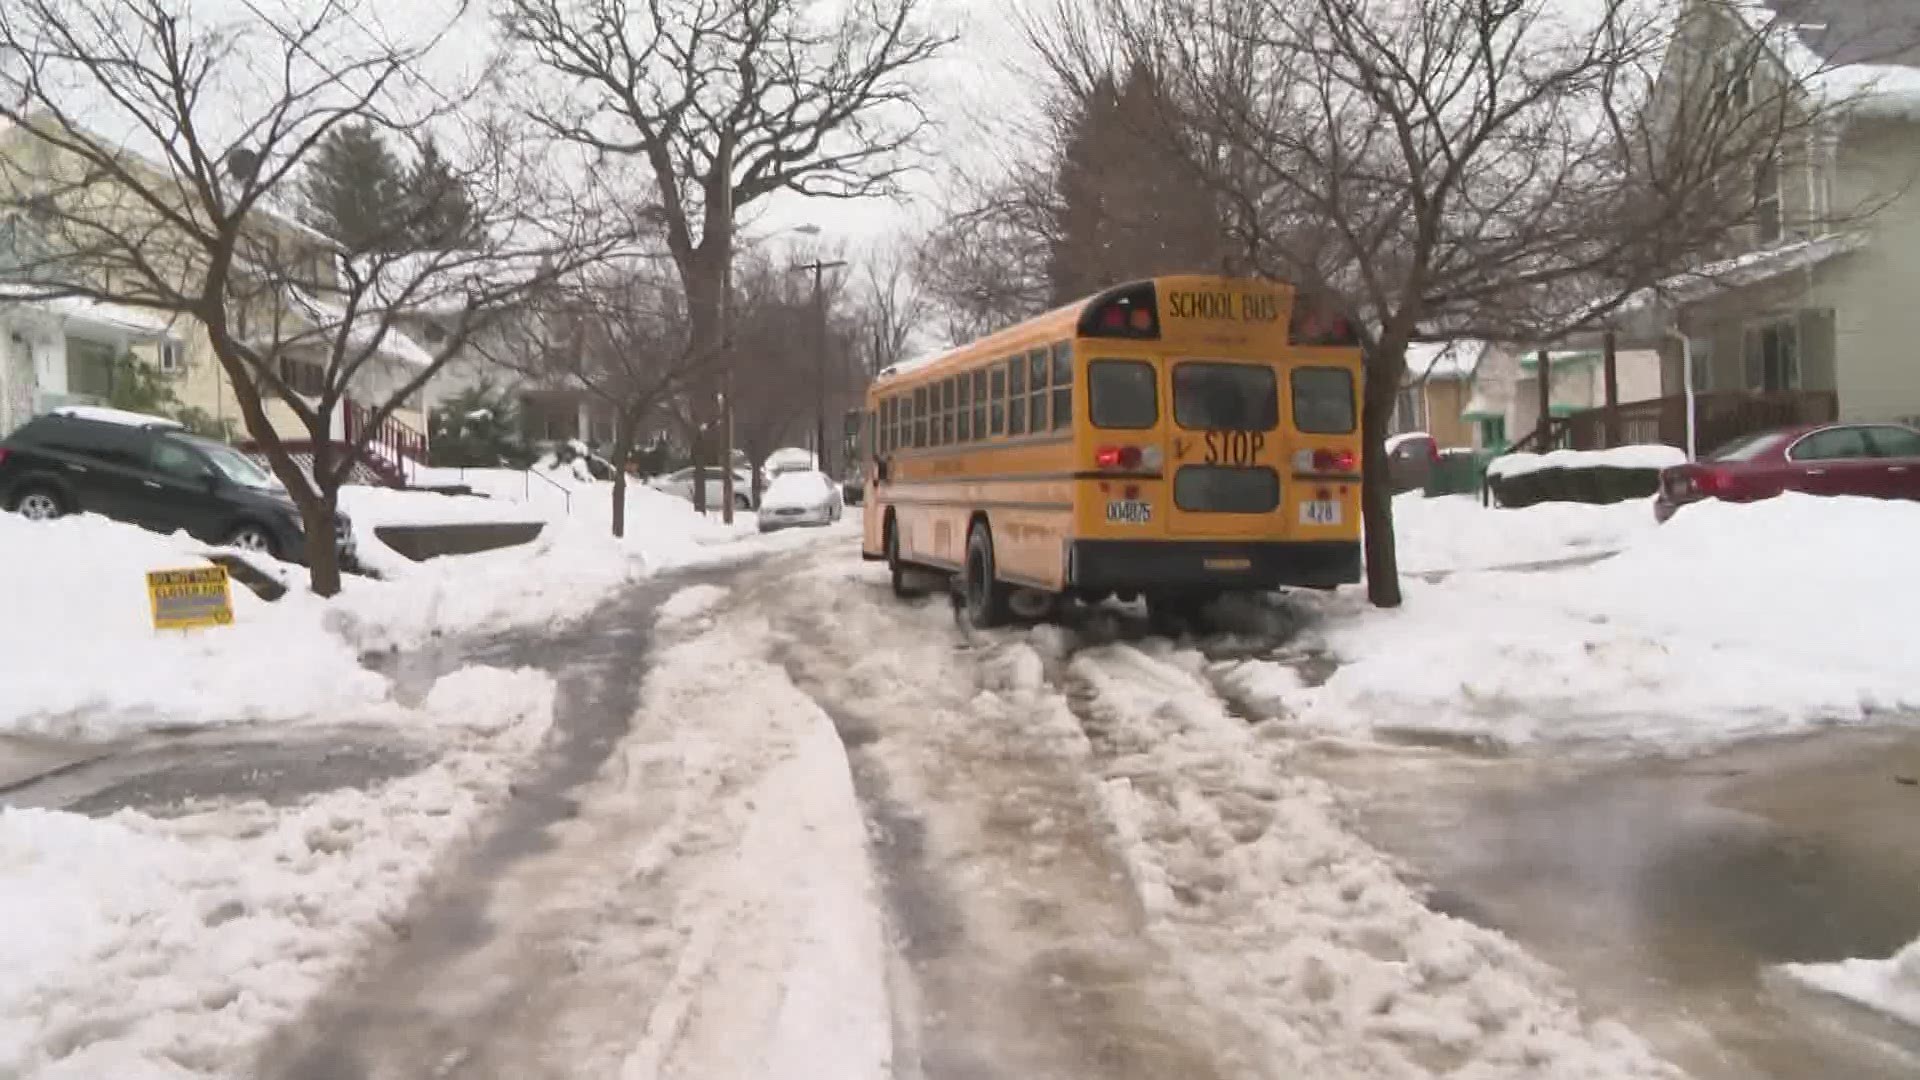 Jan. 23, 2019: The city of Akron has been facing complaints from residents that it's taking too long to plow the streets days after the weekend snow storm. As a result, our crews witnessed an Akron school bus stuck in the icy, snowy conditions.